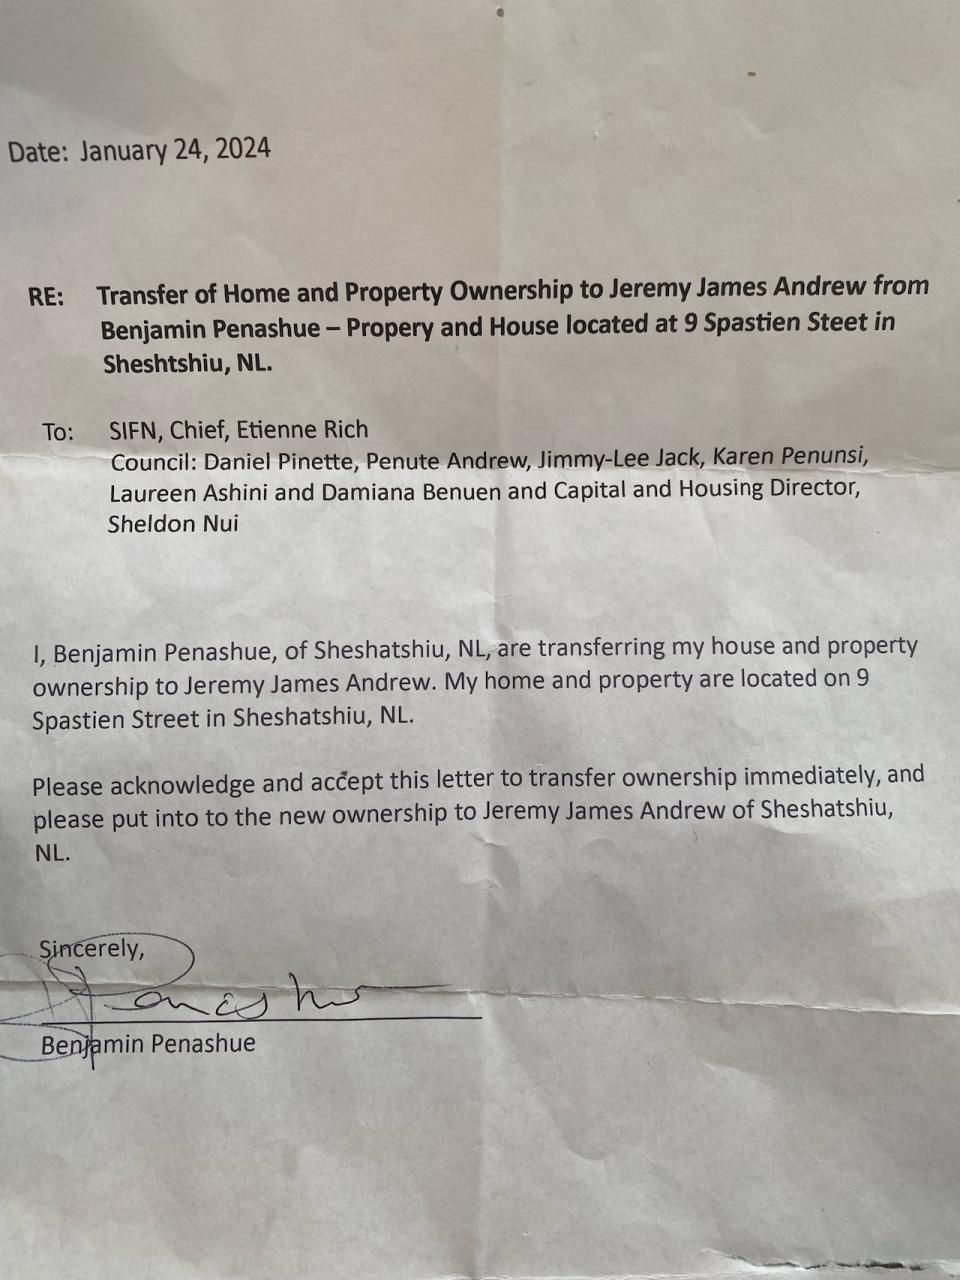 Andrew says Ben Penashue transferred ownership of the home to him in this letter.